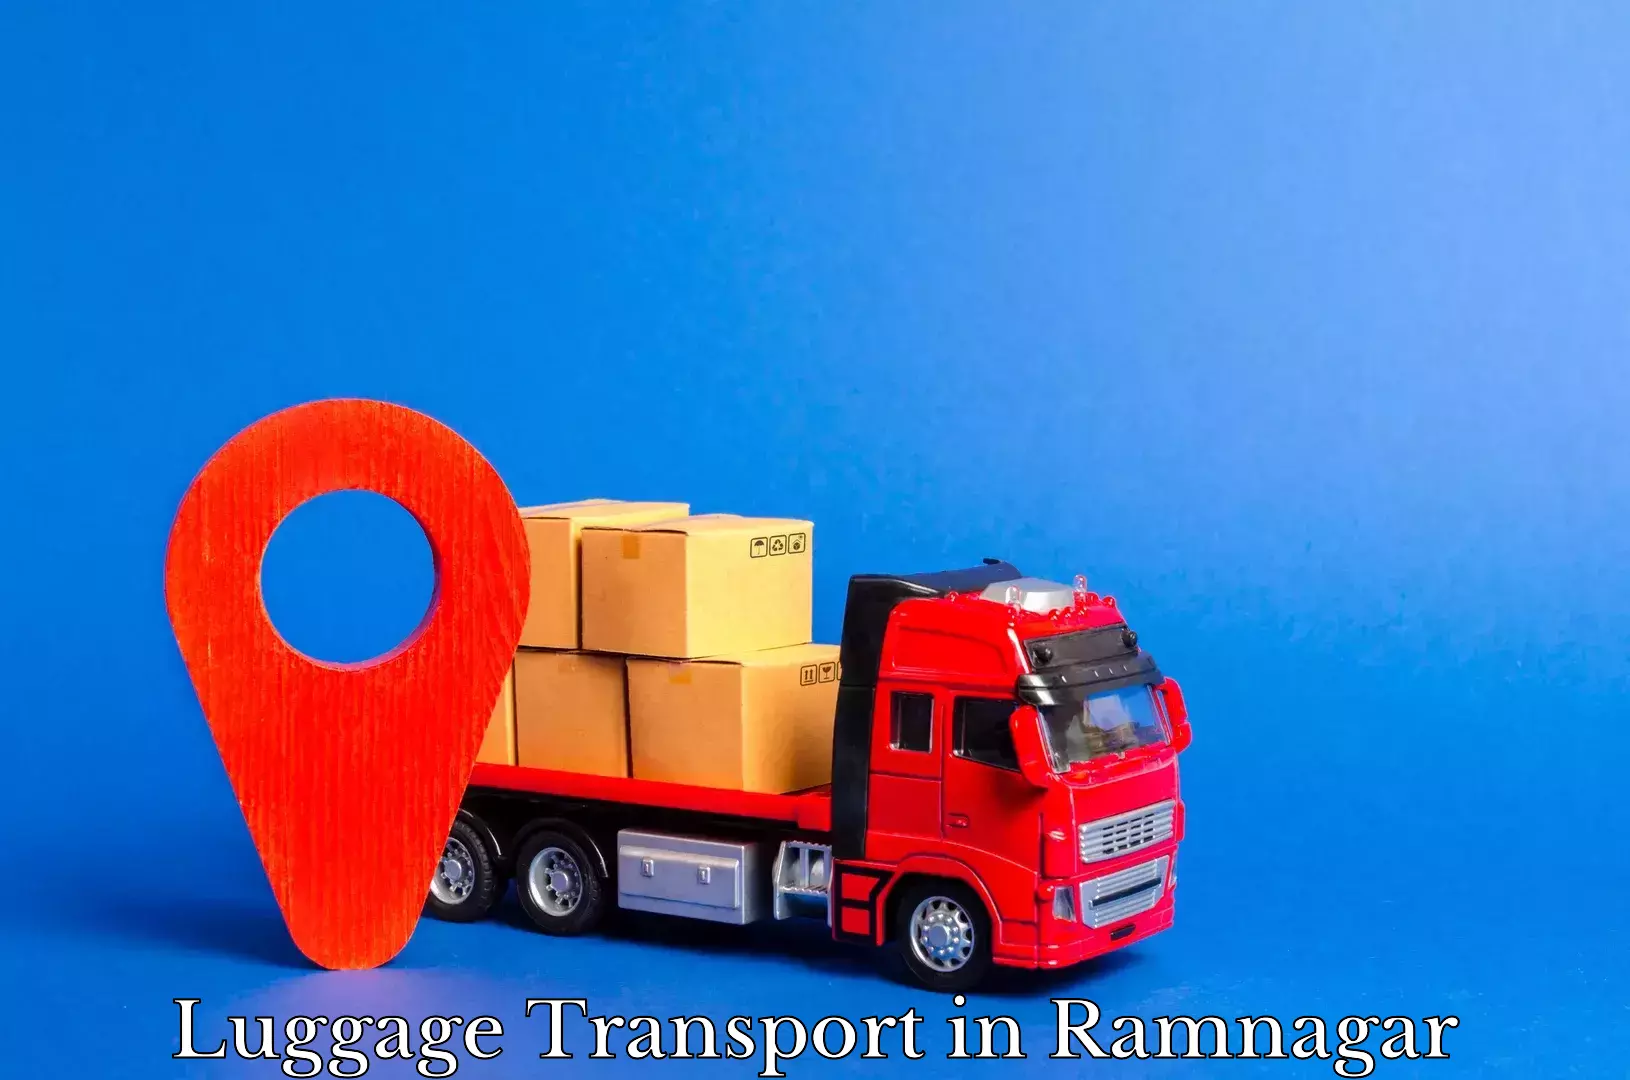 Luggage transport consulting in Ramnagar